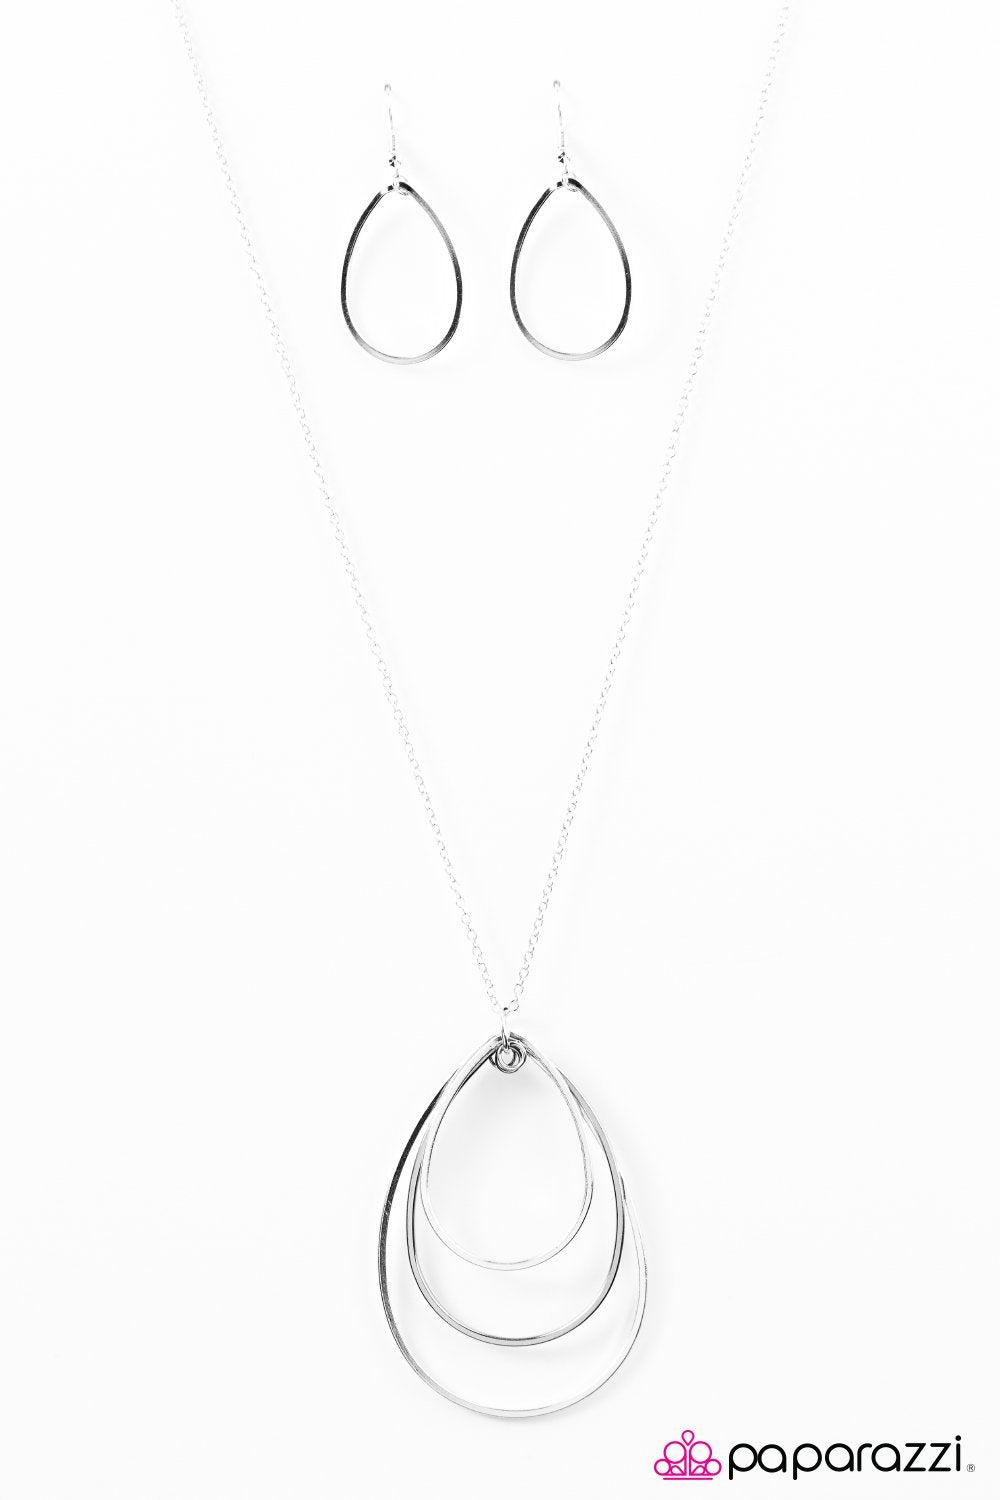 Summer Storm Silver Teardrop Necklace - Paparazzi Accessories-CarasShop.com - $5 Jewelry by Cara Jewels